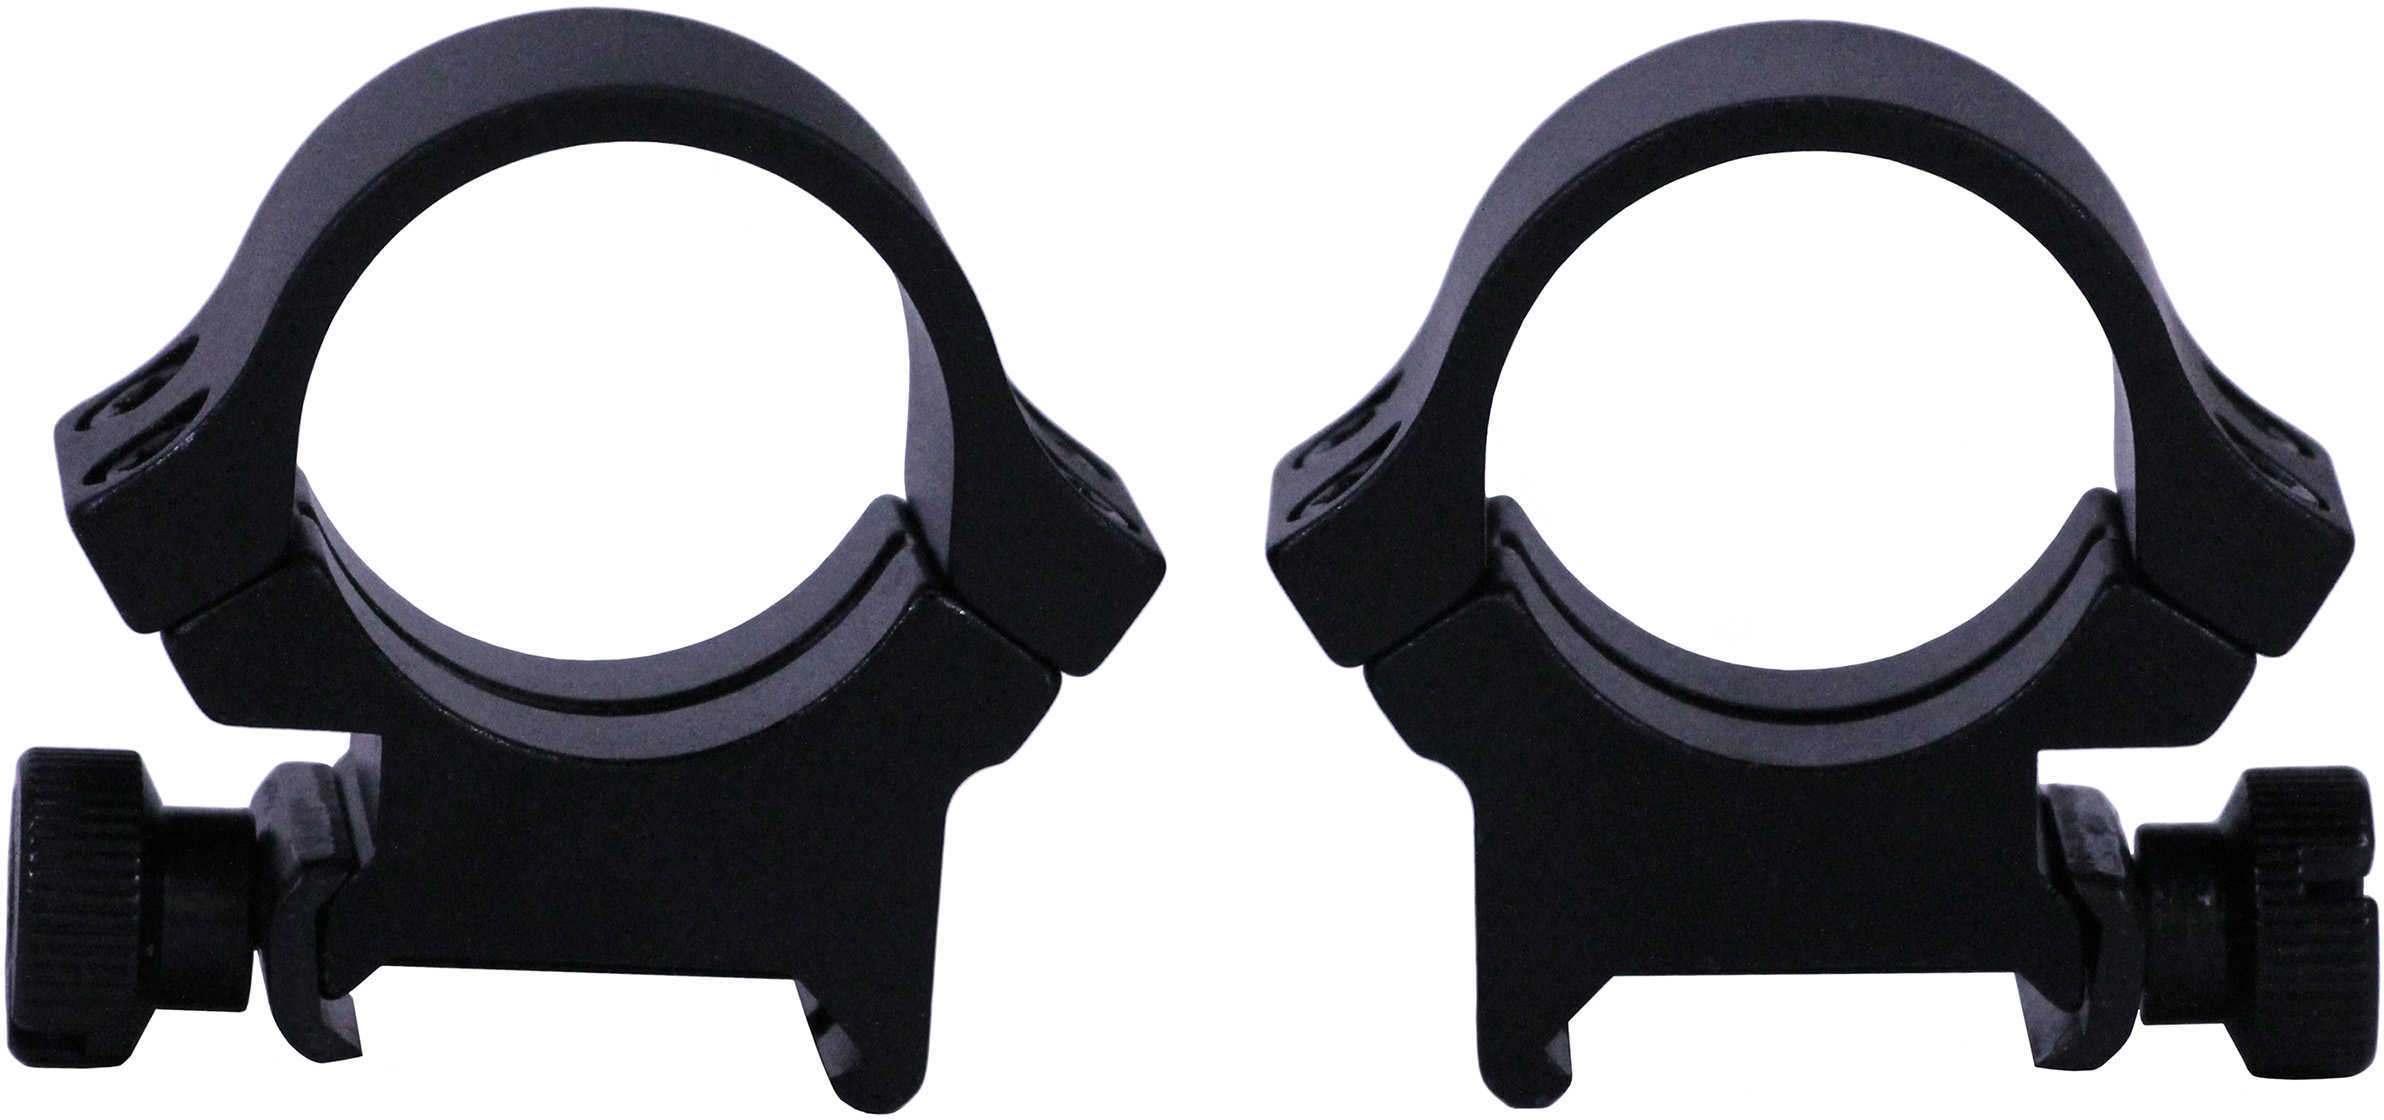 Redfield High Aluminum 4 Hole Rings With Matte Black Finish Md: 47332